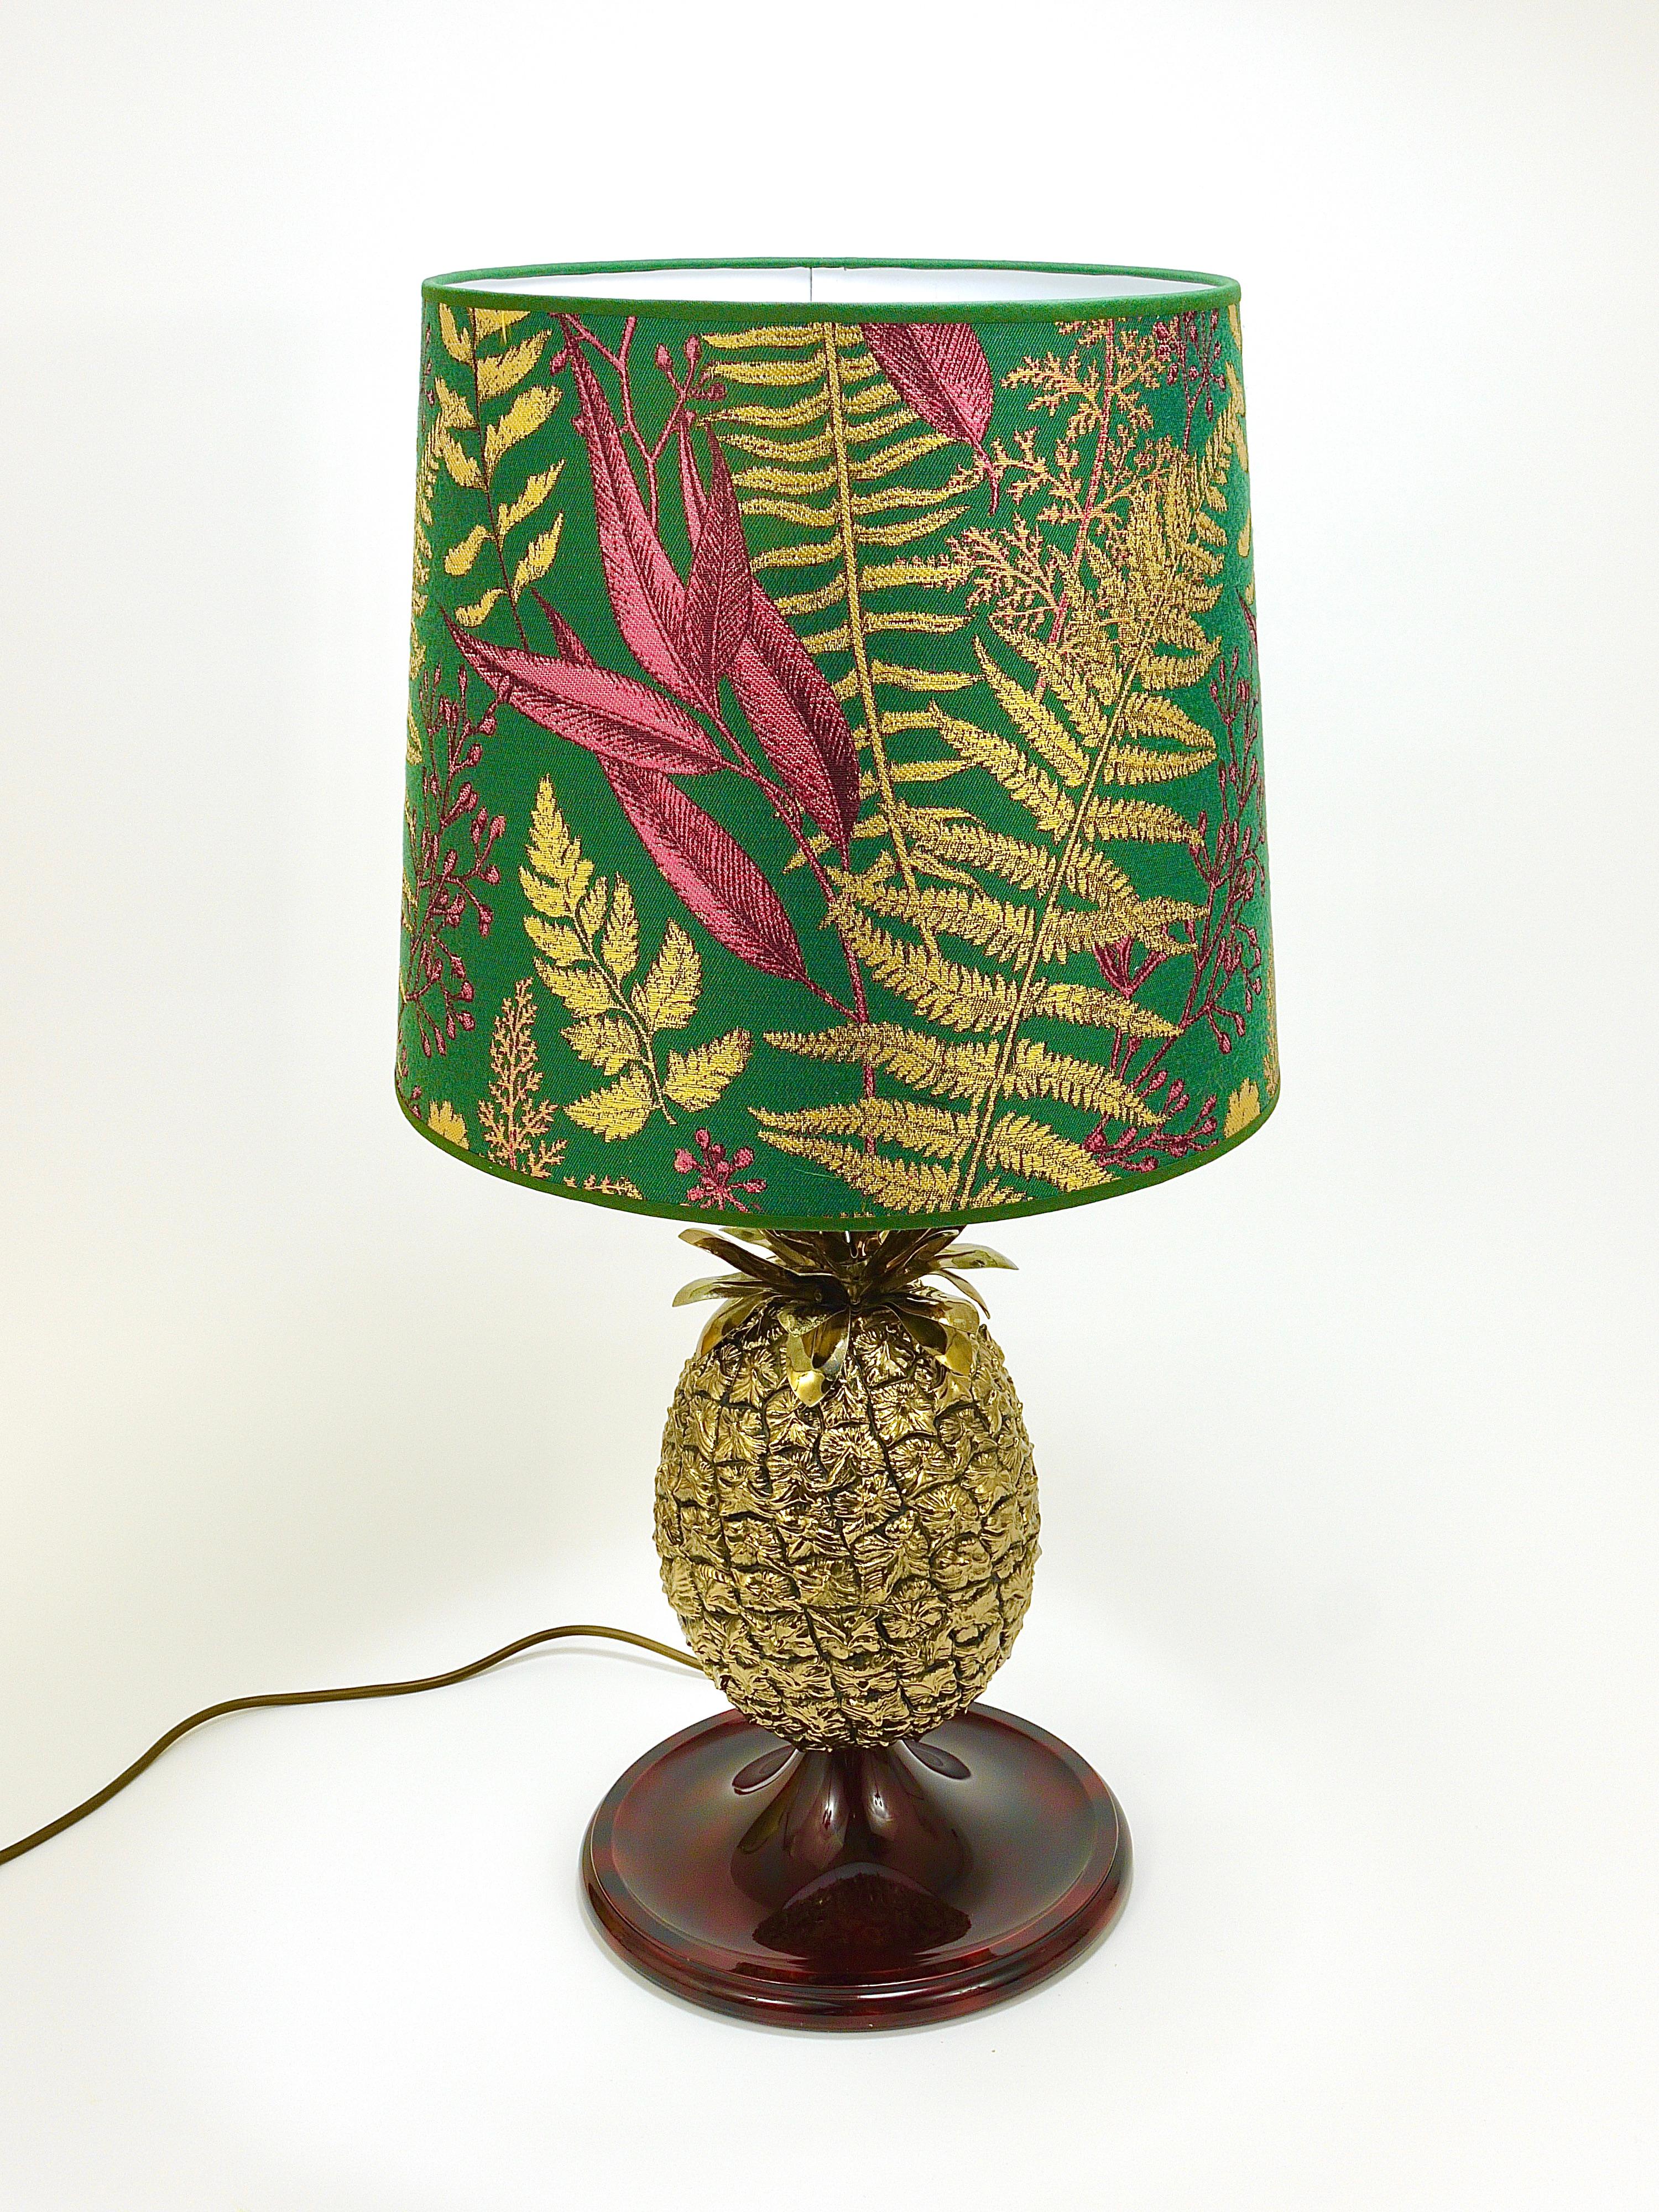 Mauro Manetti Hollywood Regency Pineapple Brass Table Lamp, Italy, 1970s For Sale 9